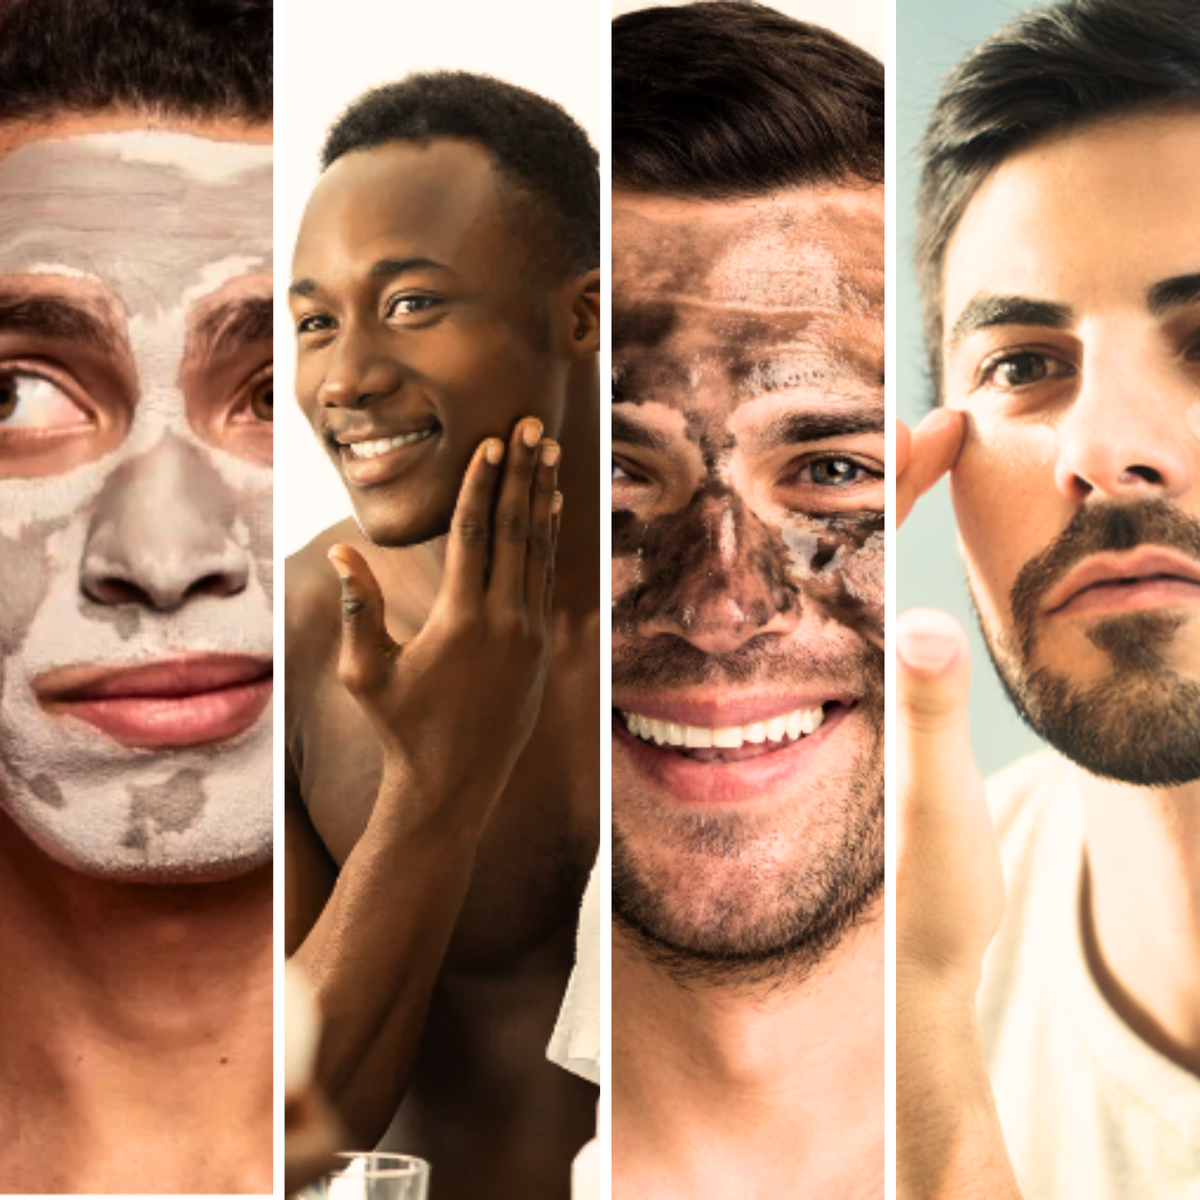 4 different men applying skin care routines.